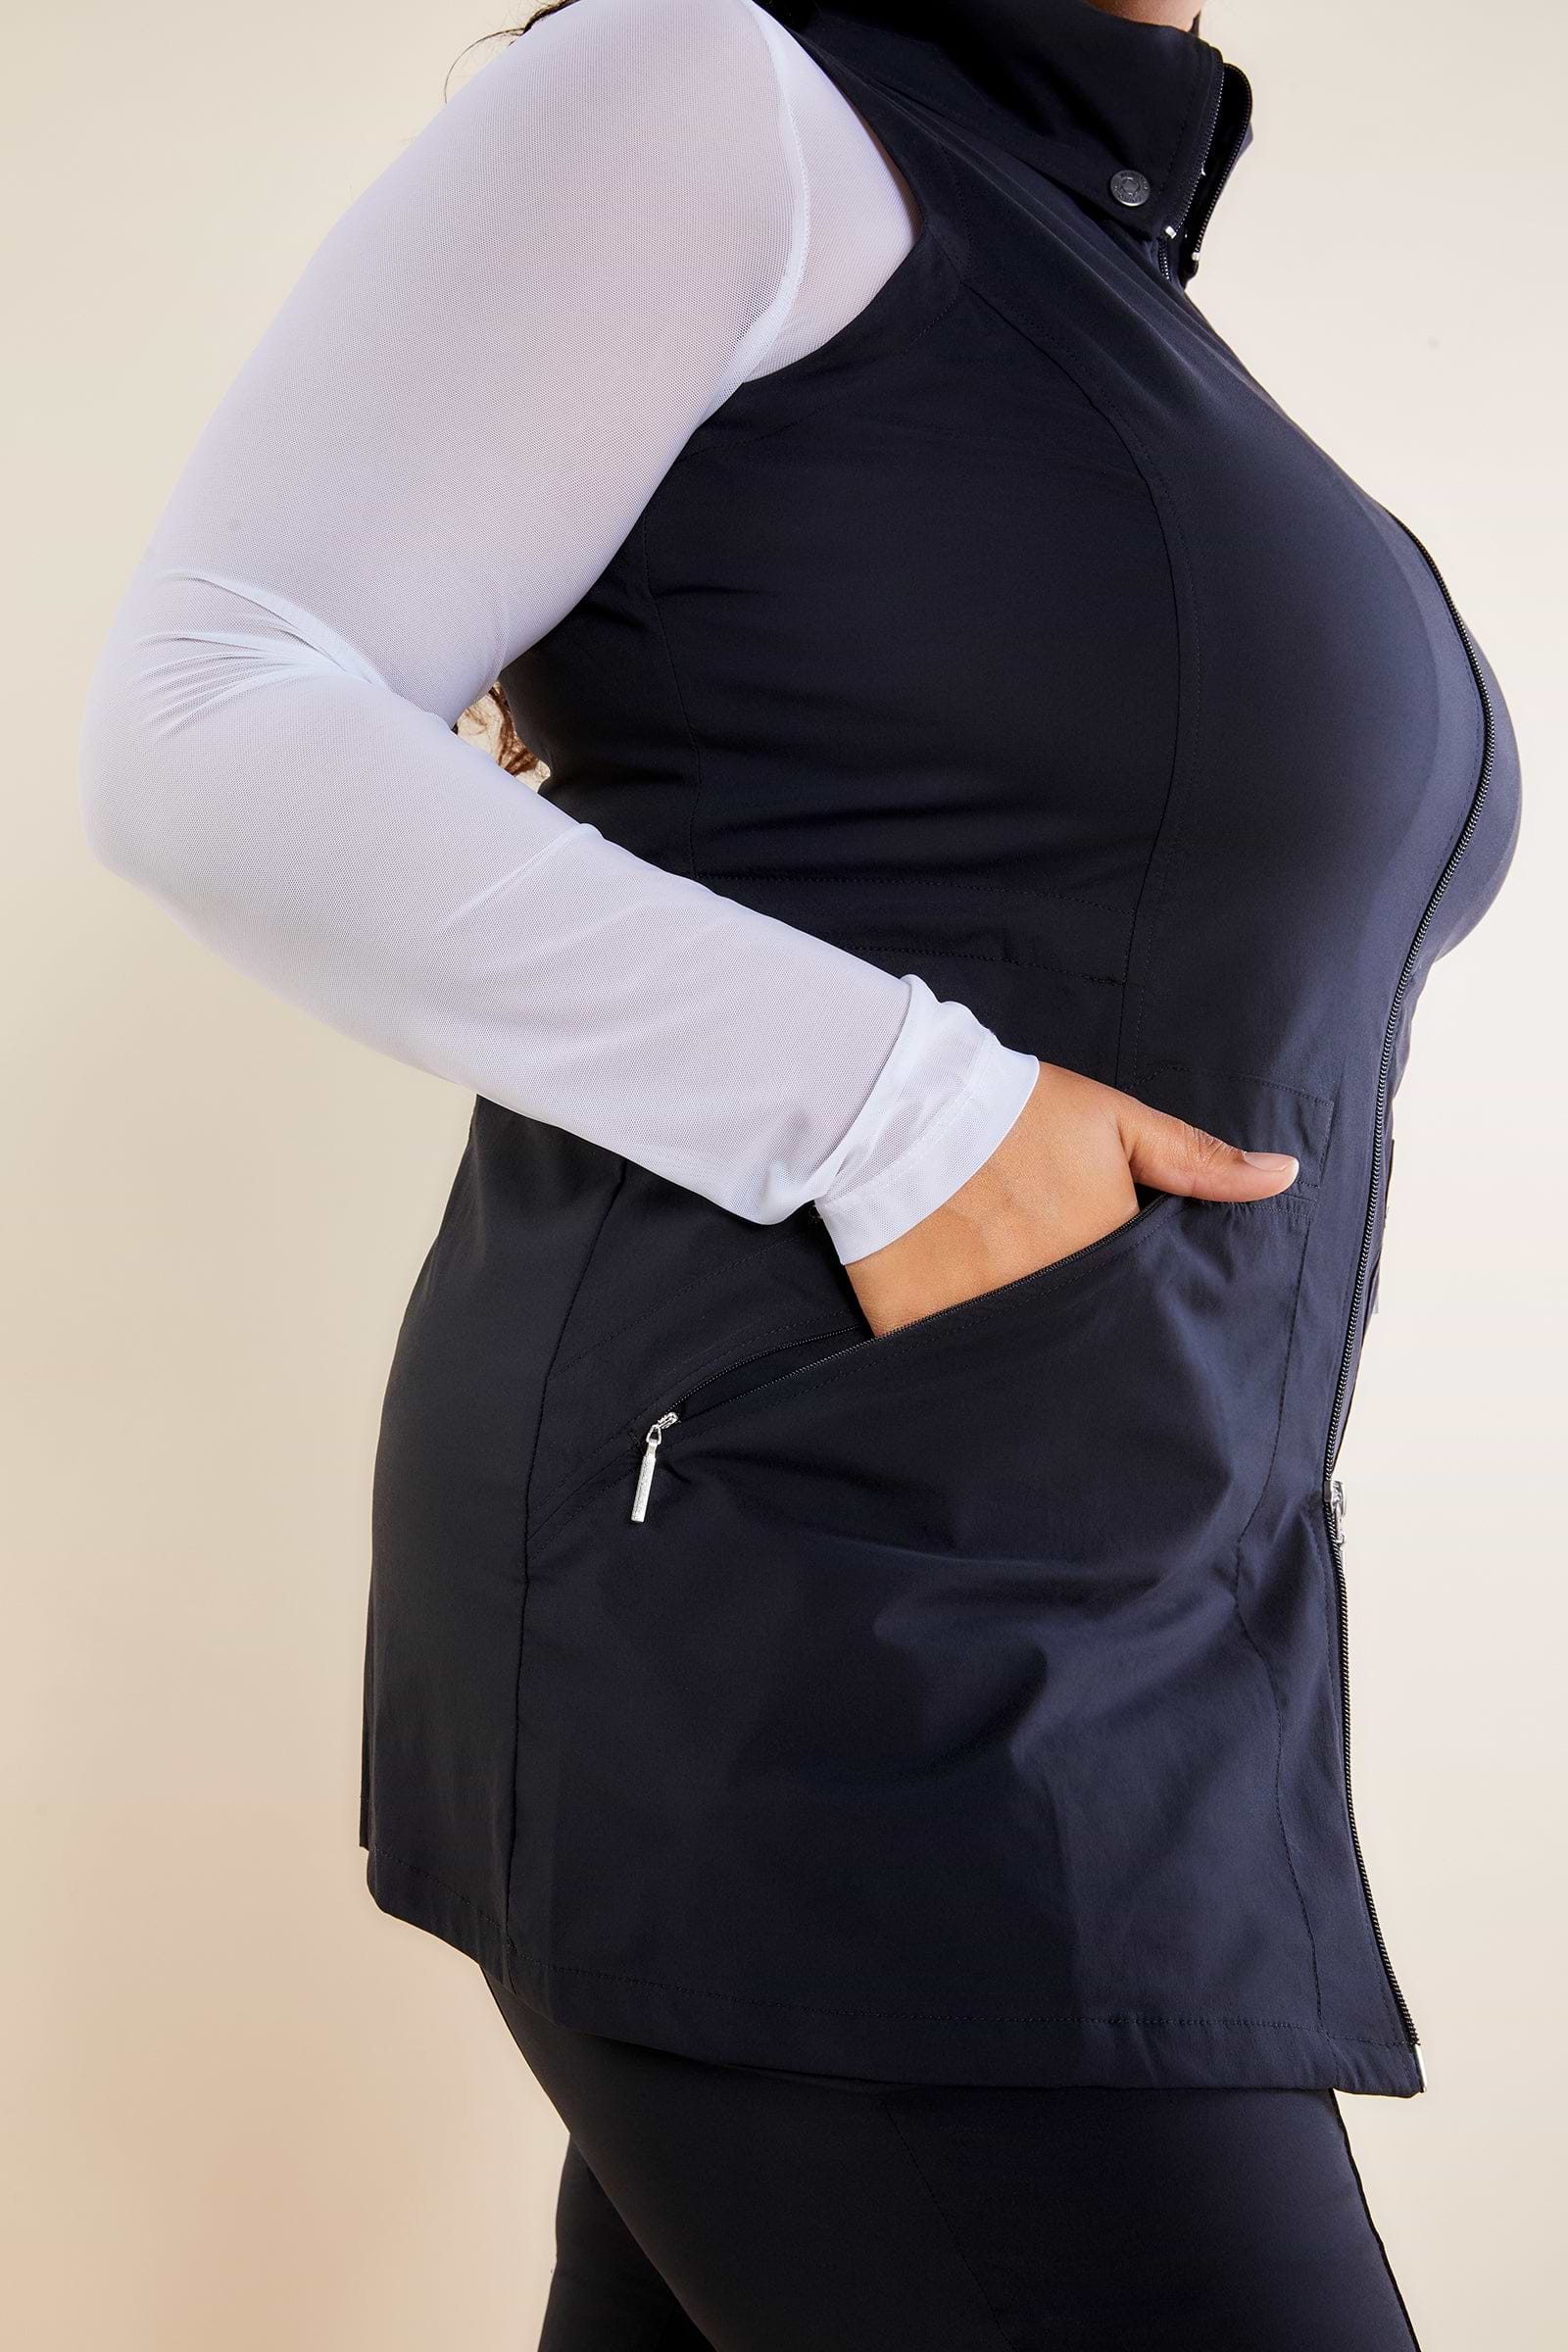 The Best Travel Vest. Woman Showing the Side Profile of a Delaney Travel Vest in Black